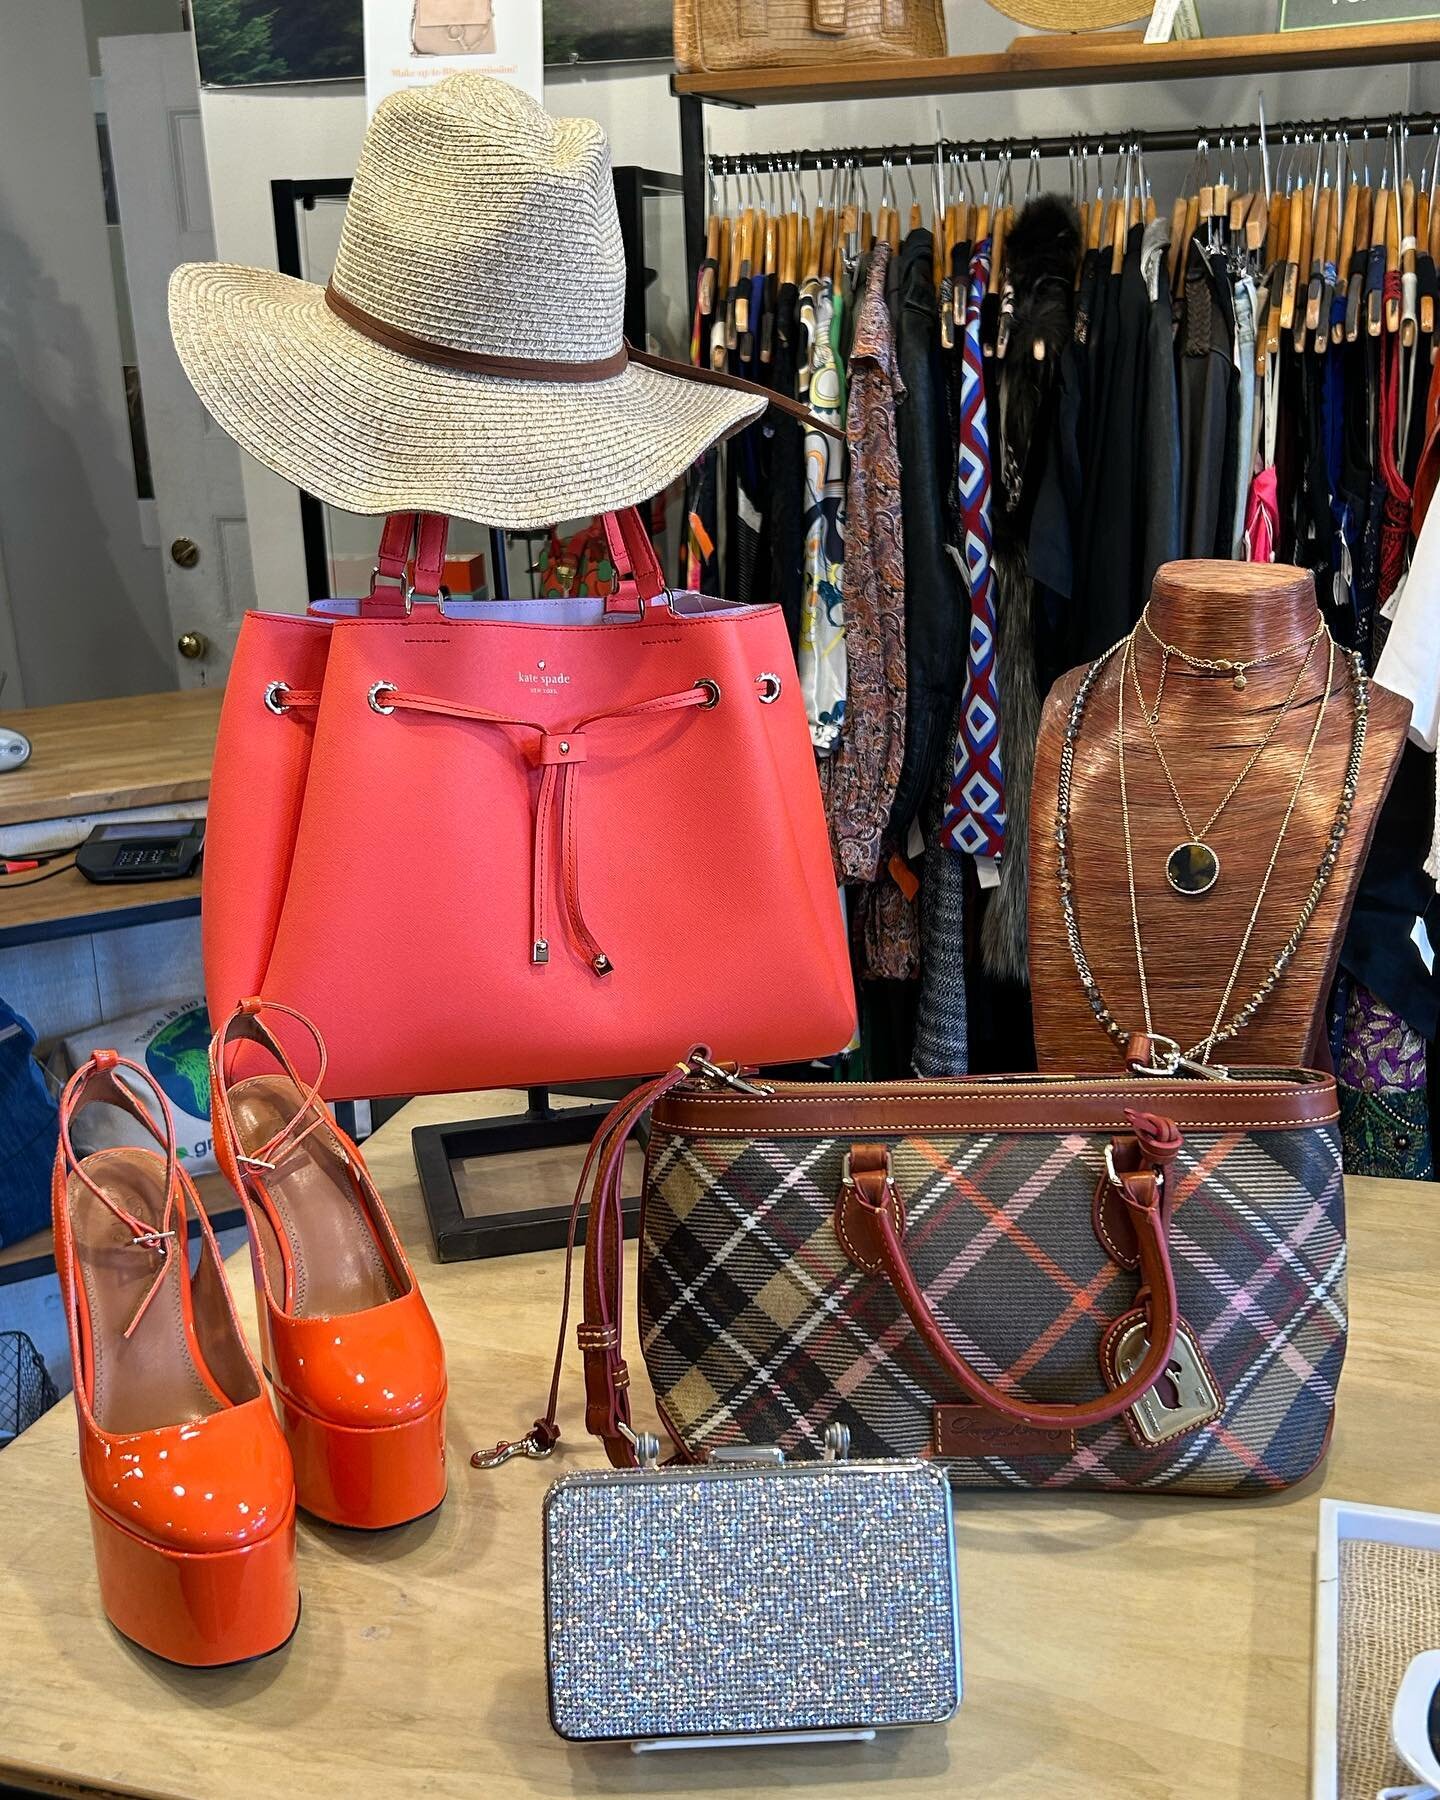 Obsessing over fall colors!!🥰 

Come in store and check out our fall consignments🍂🧡👜

For inquiries, please call or email us at:
📞 609-460-4523
📧 lambertville@greenestreet.com

Greene Street Lambertville is not affiliated with the brands we sel